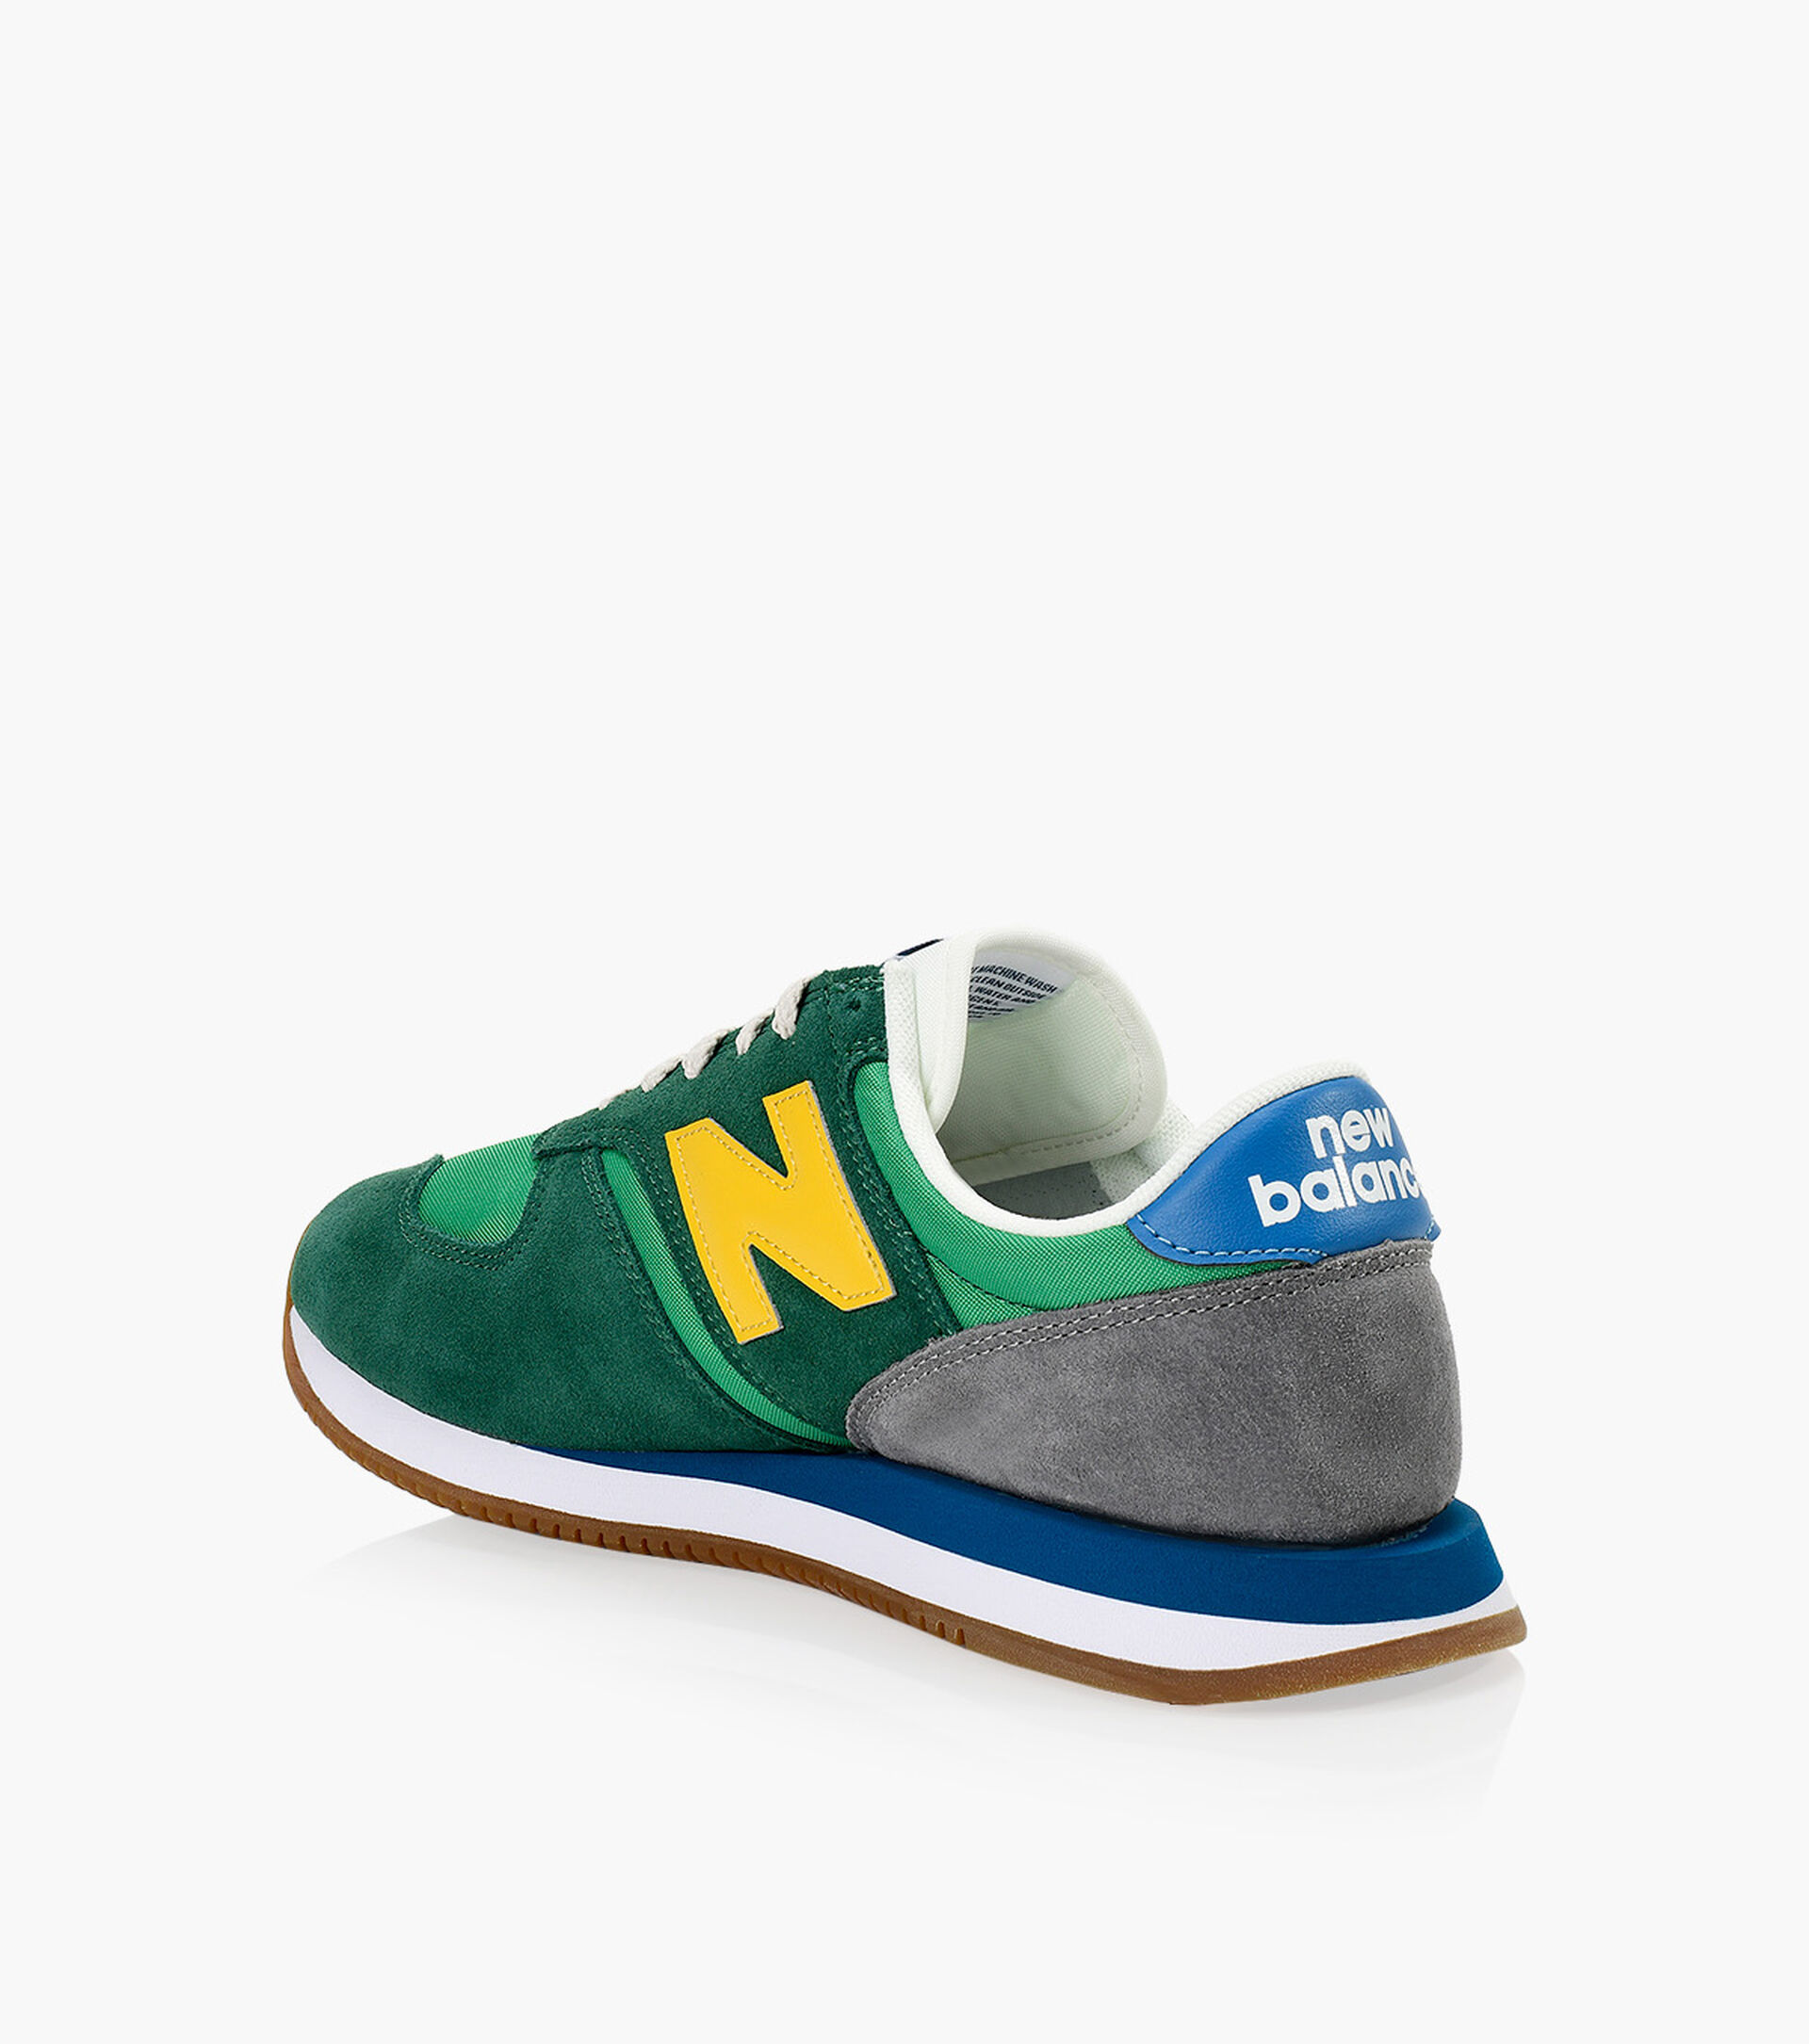 NEW BALANCE 420 - Green Fabric | Browns Shoes